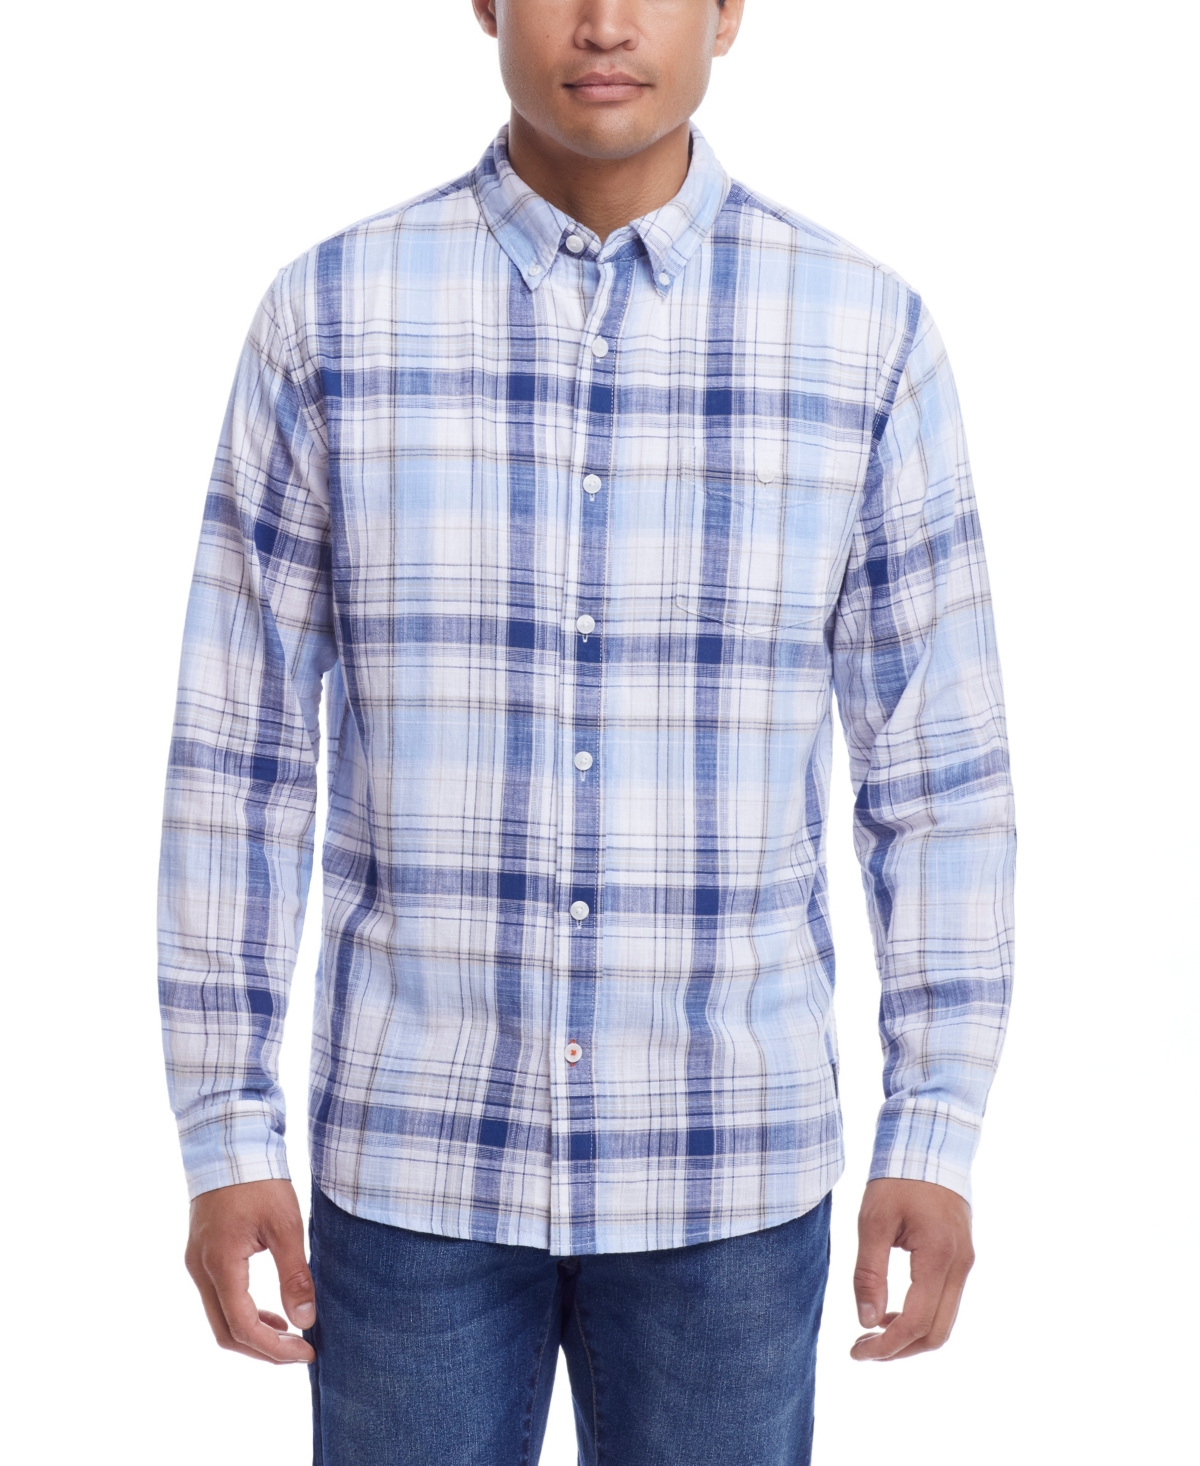 Weatherproof Vintage Men's Long Sleeve Cotton Woven Plaid Shirt In Ice Water